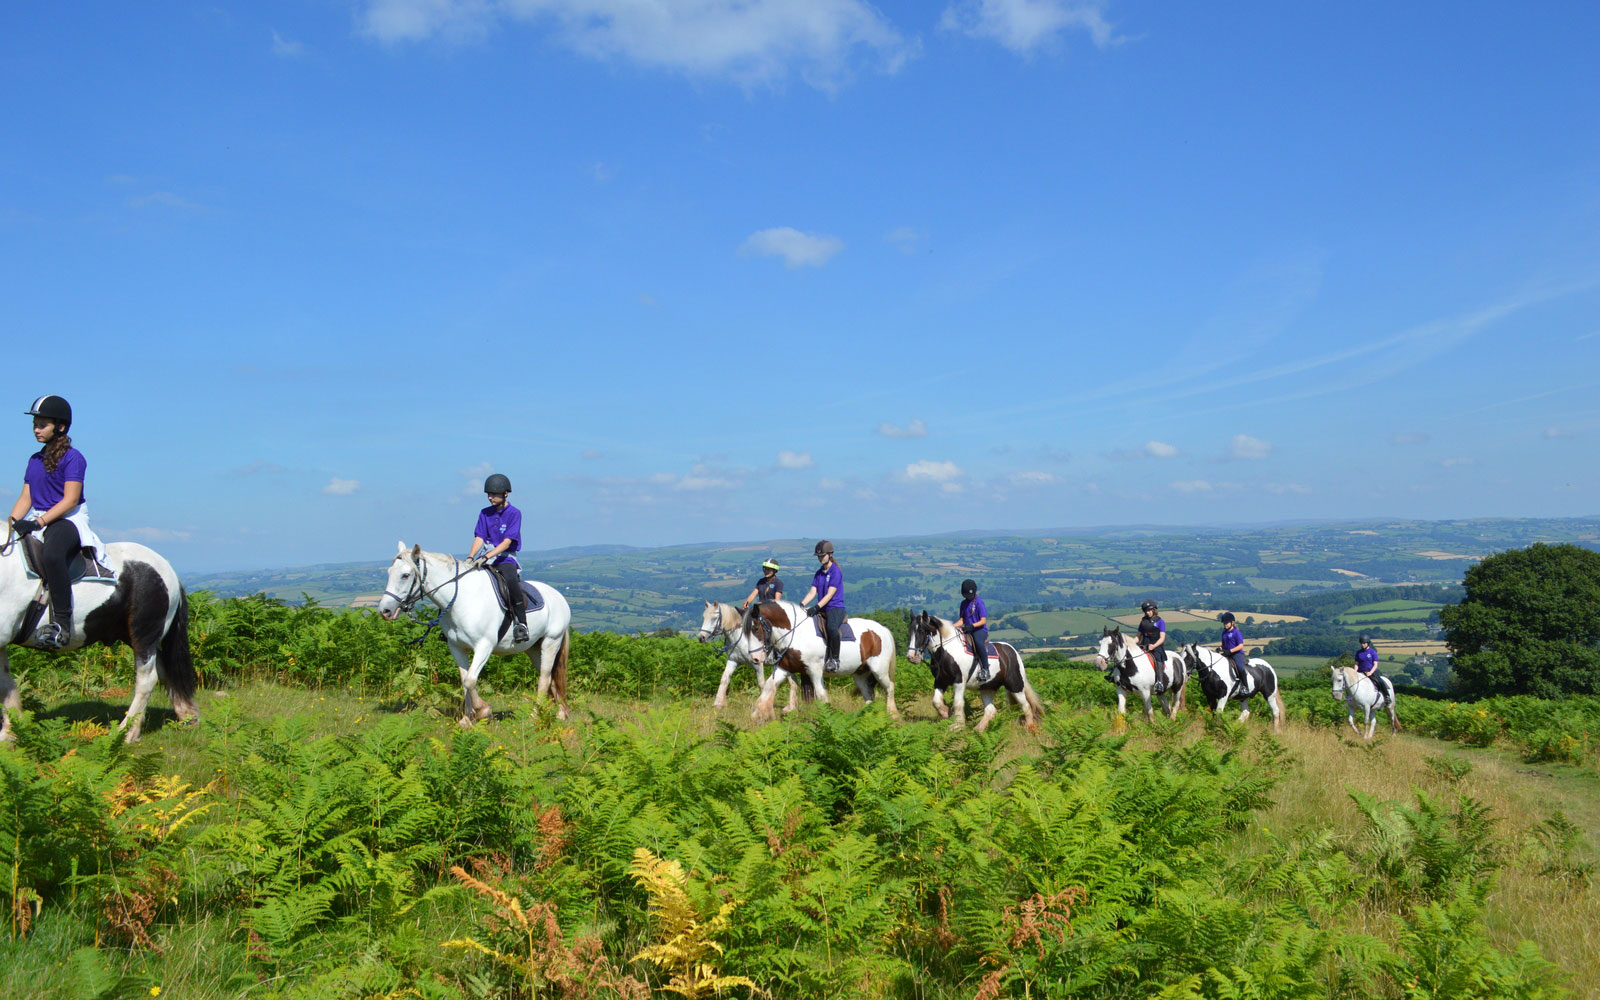 A PGL group horse riding on the Brecon Beacons